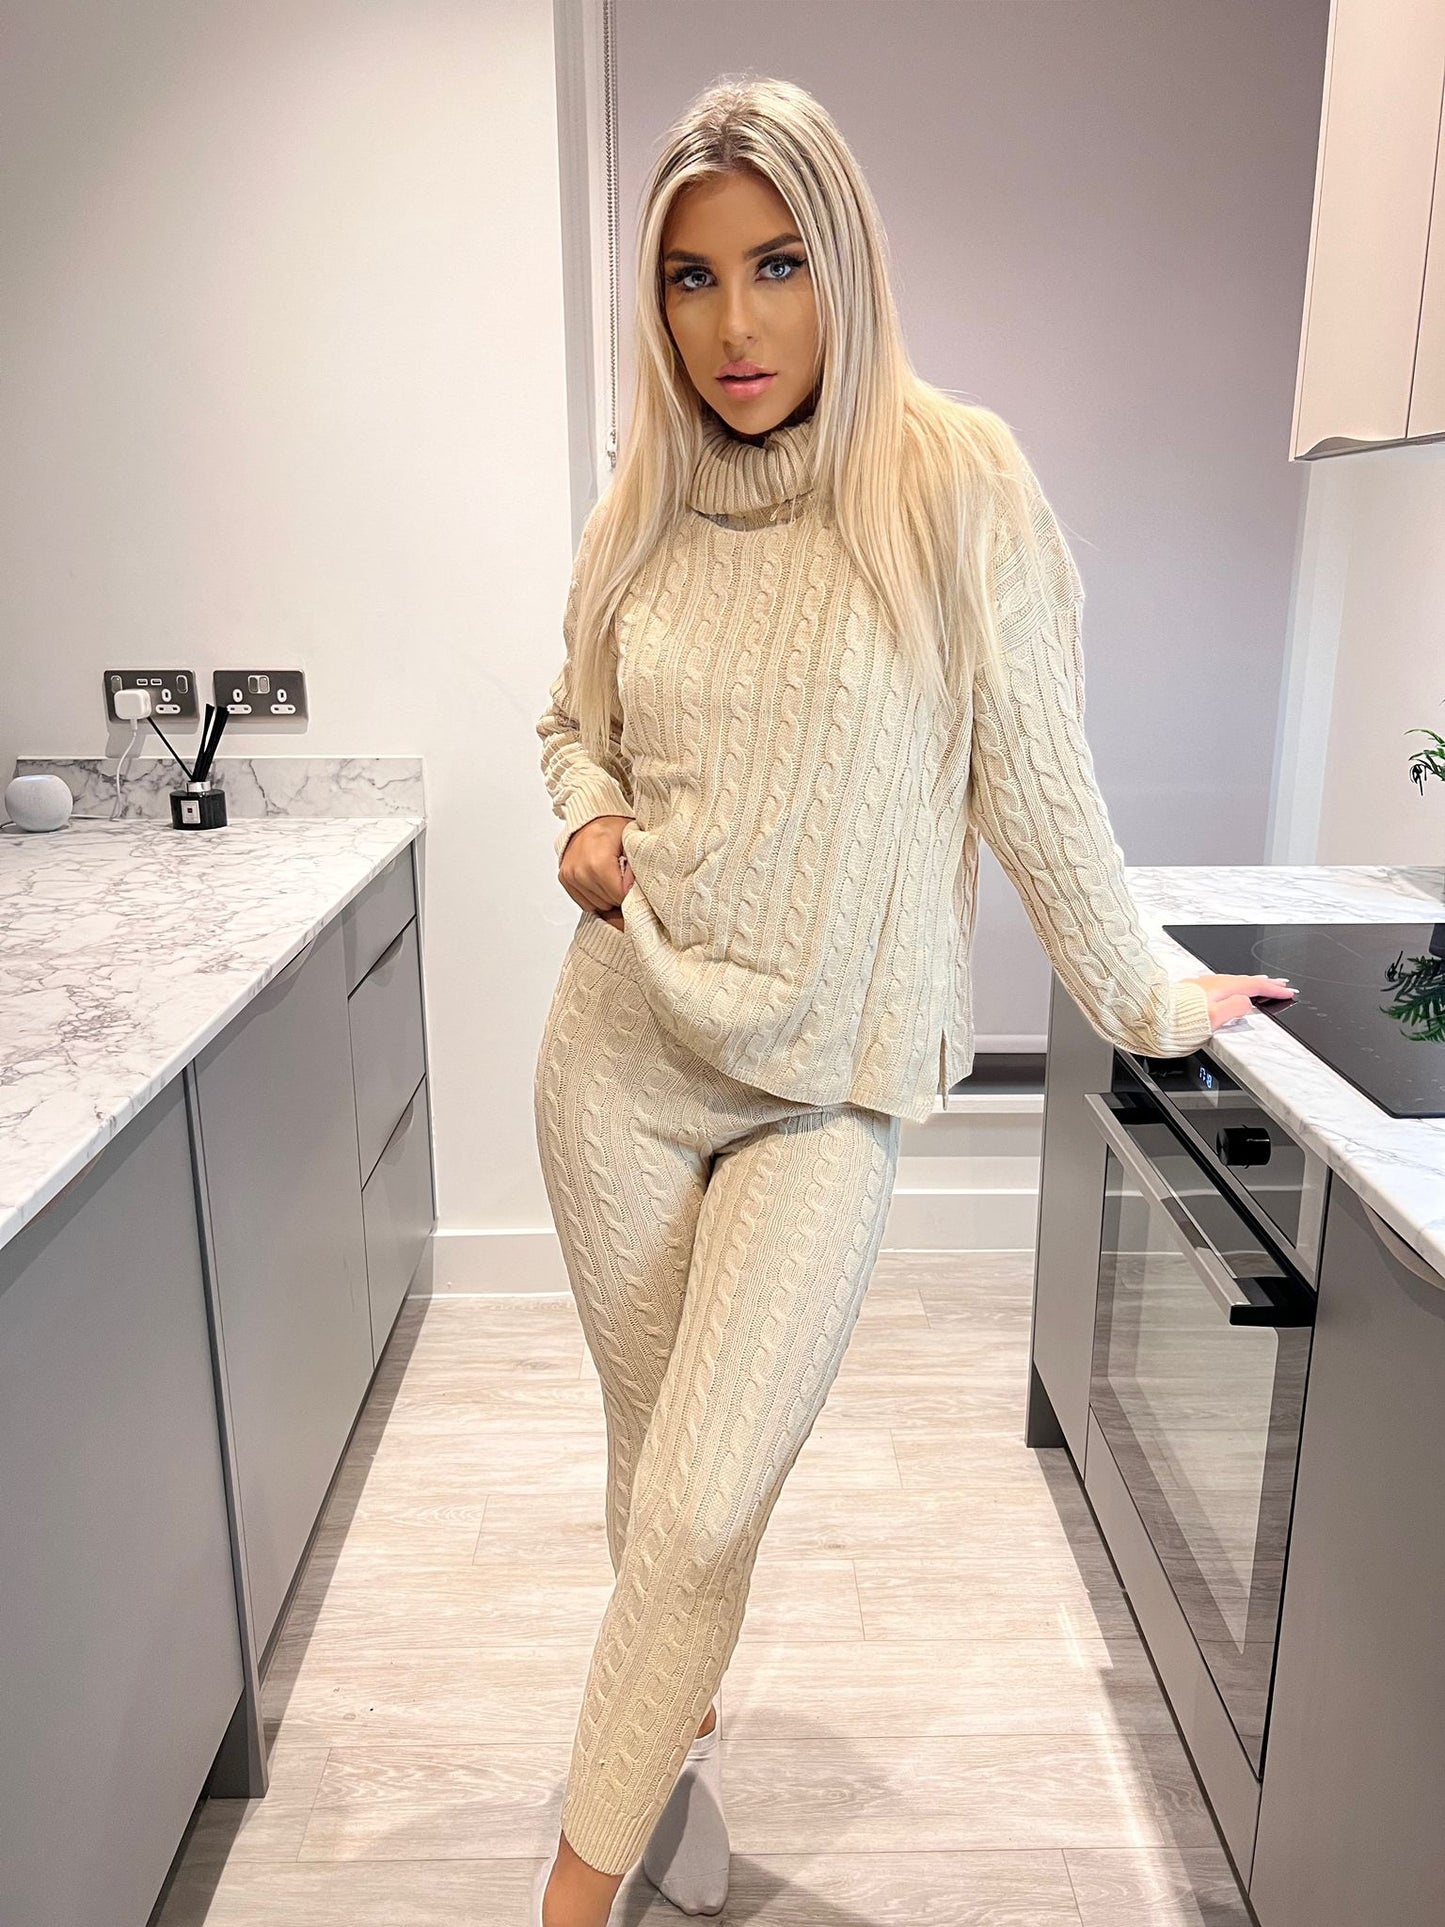 Cable knit 2 piece lounge wear roll neck set , perfect for those chilly days and nights in to wrap up with this cable knitted womans loungewear tracksuit .